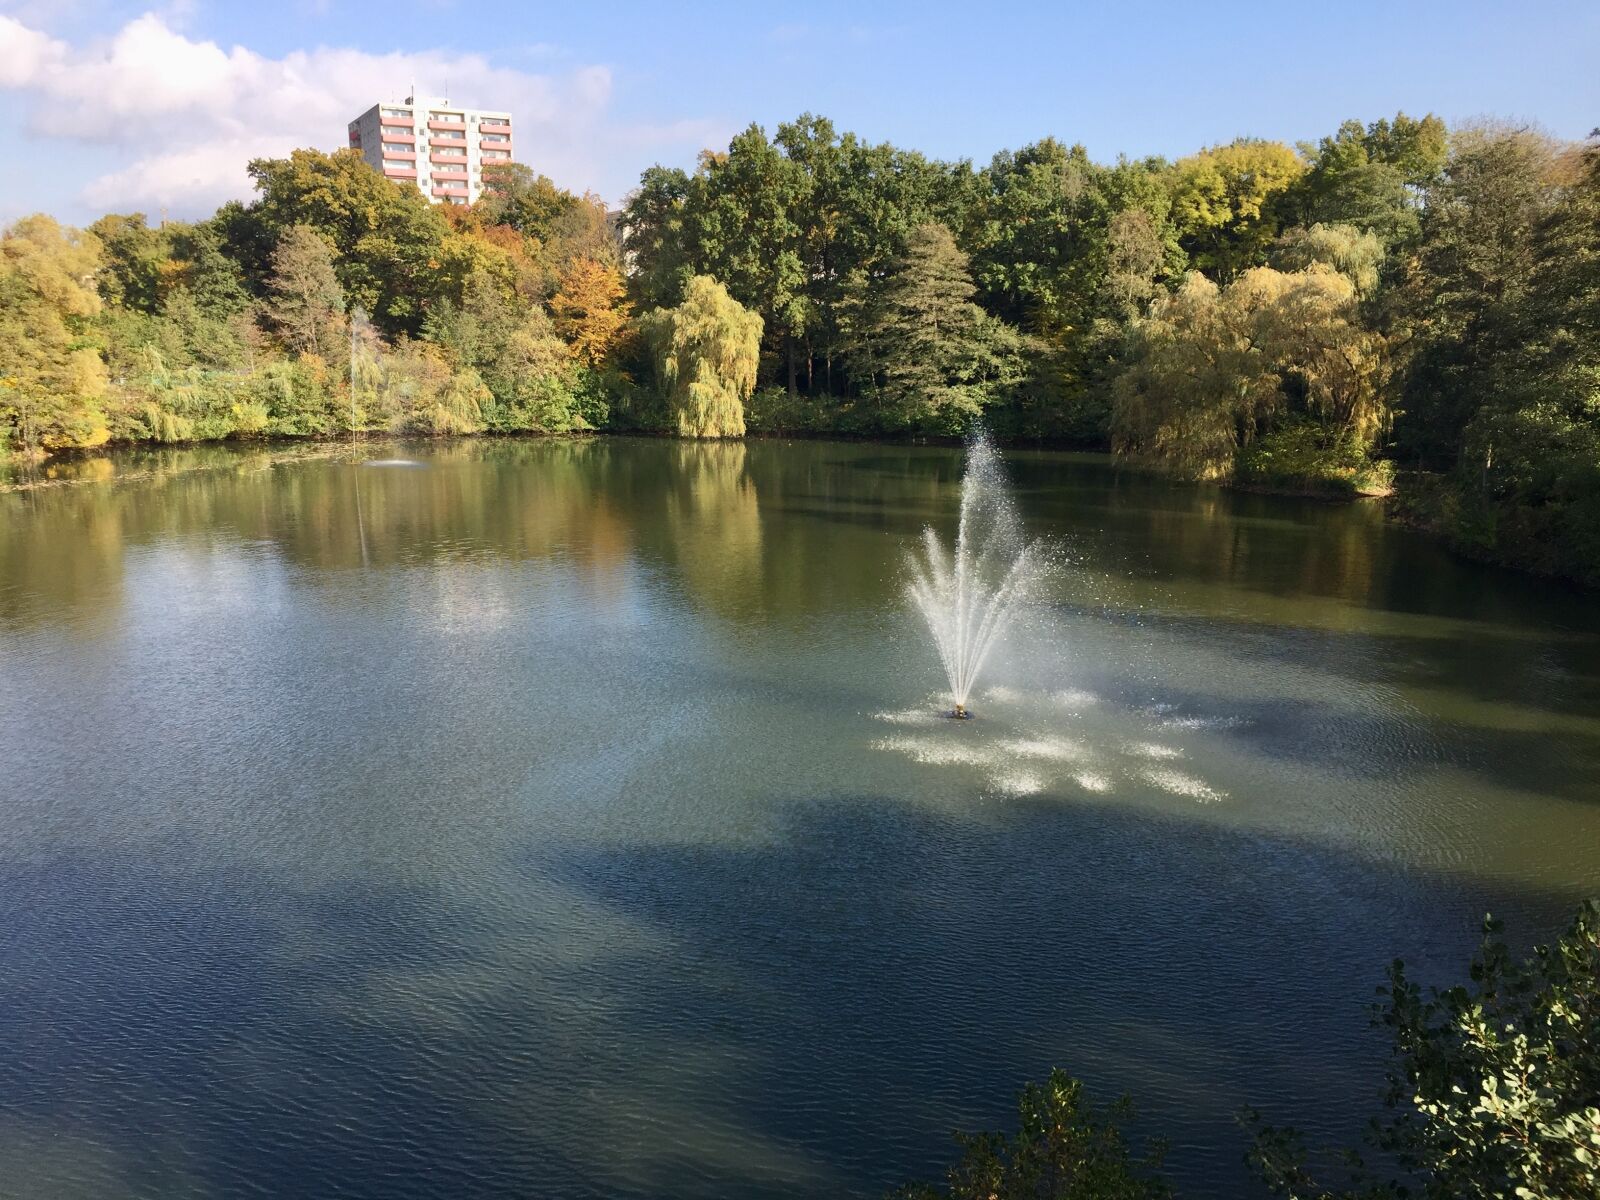 iPhone 6 back camera 4.15mm f/2.2 sample photo. Water, autumn, autumn-appearance photography